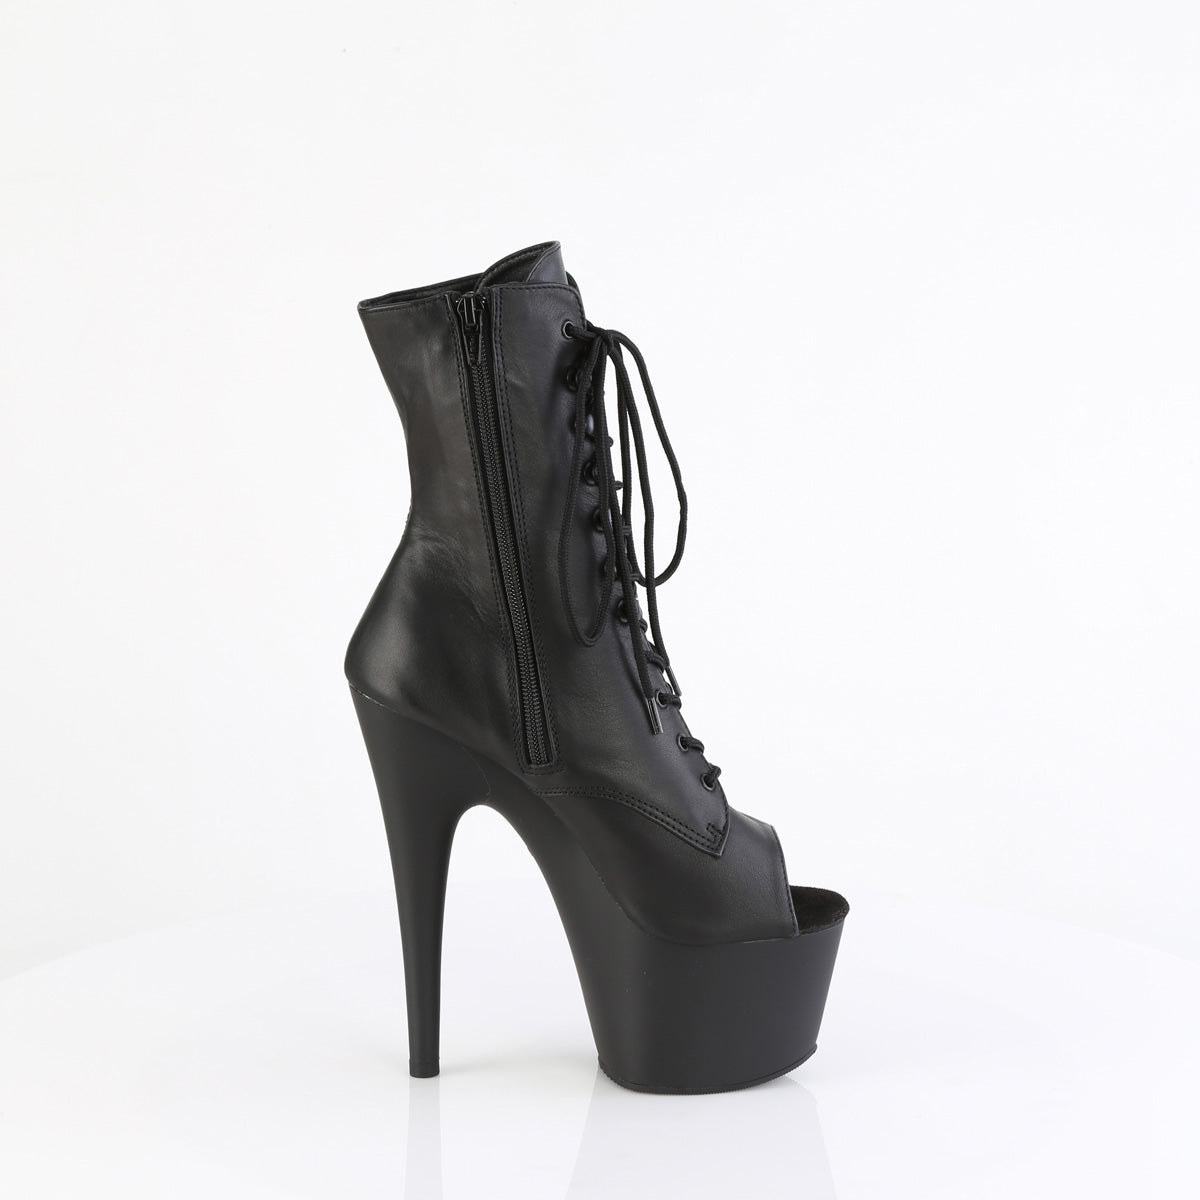 ADORE-1021 Black Leather Calf High Peep Toe Boots  Multi view 2